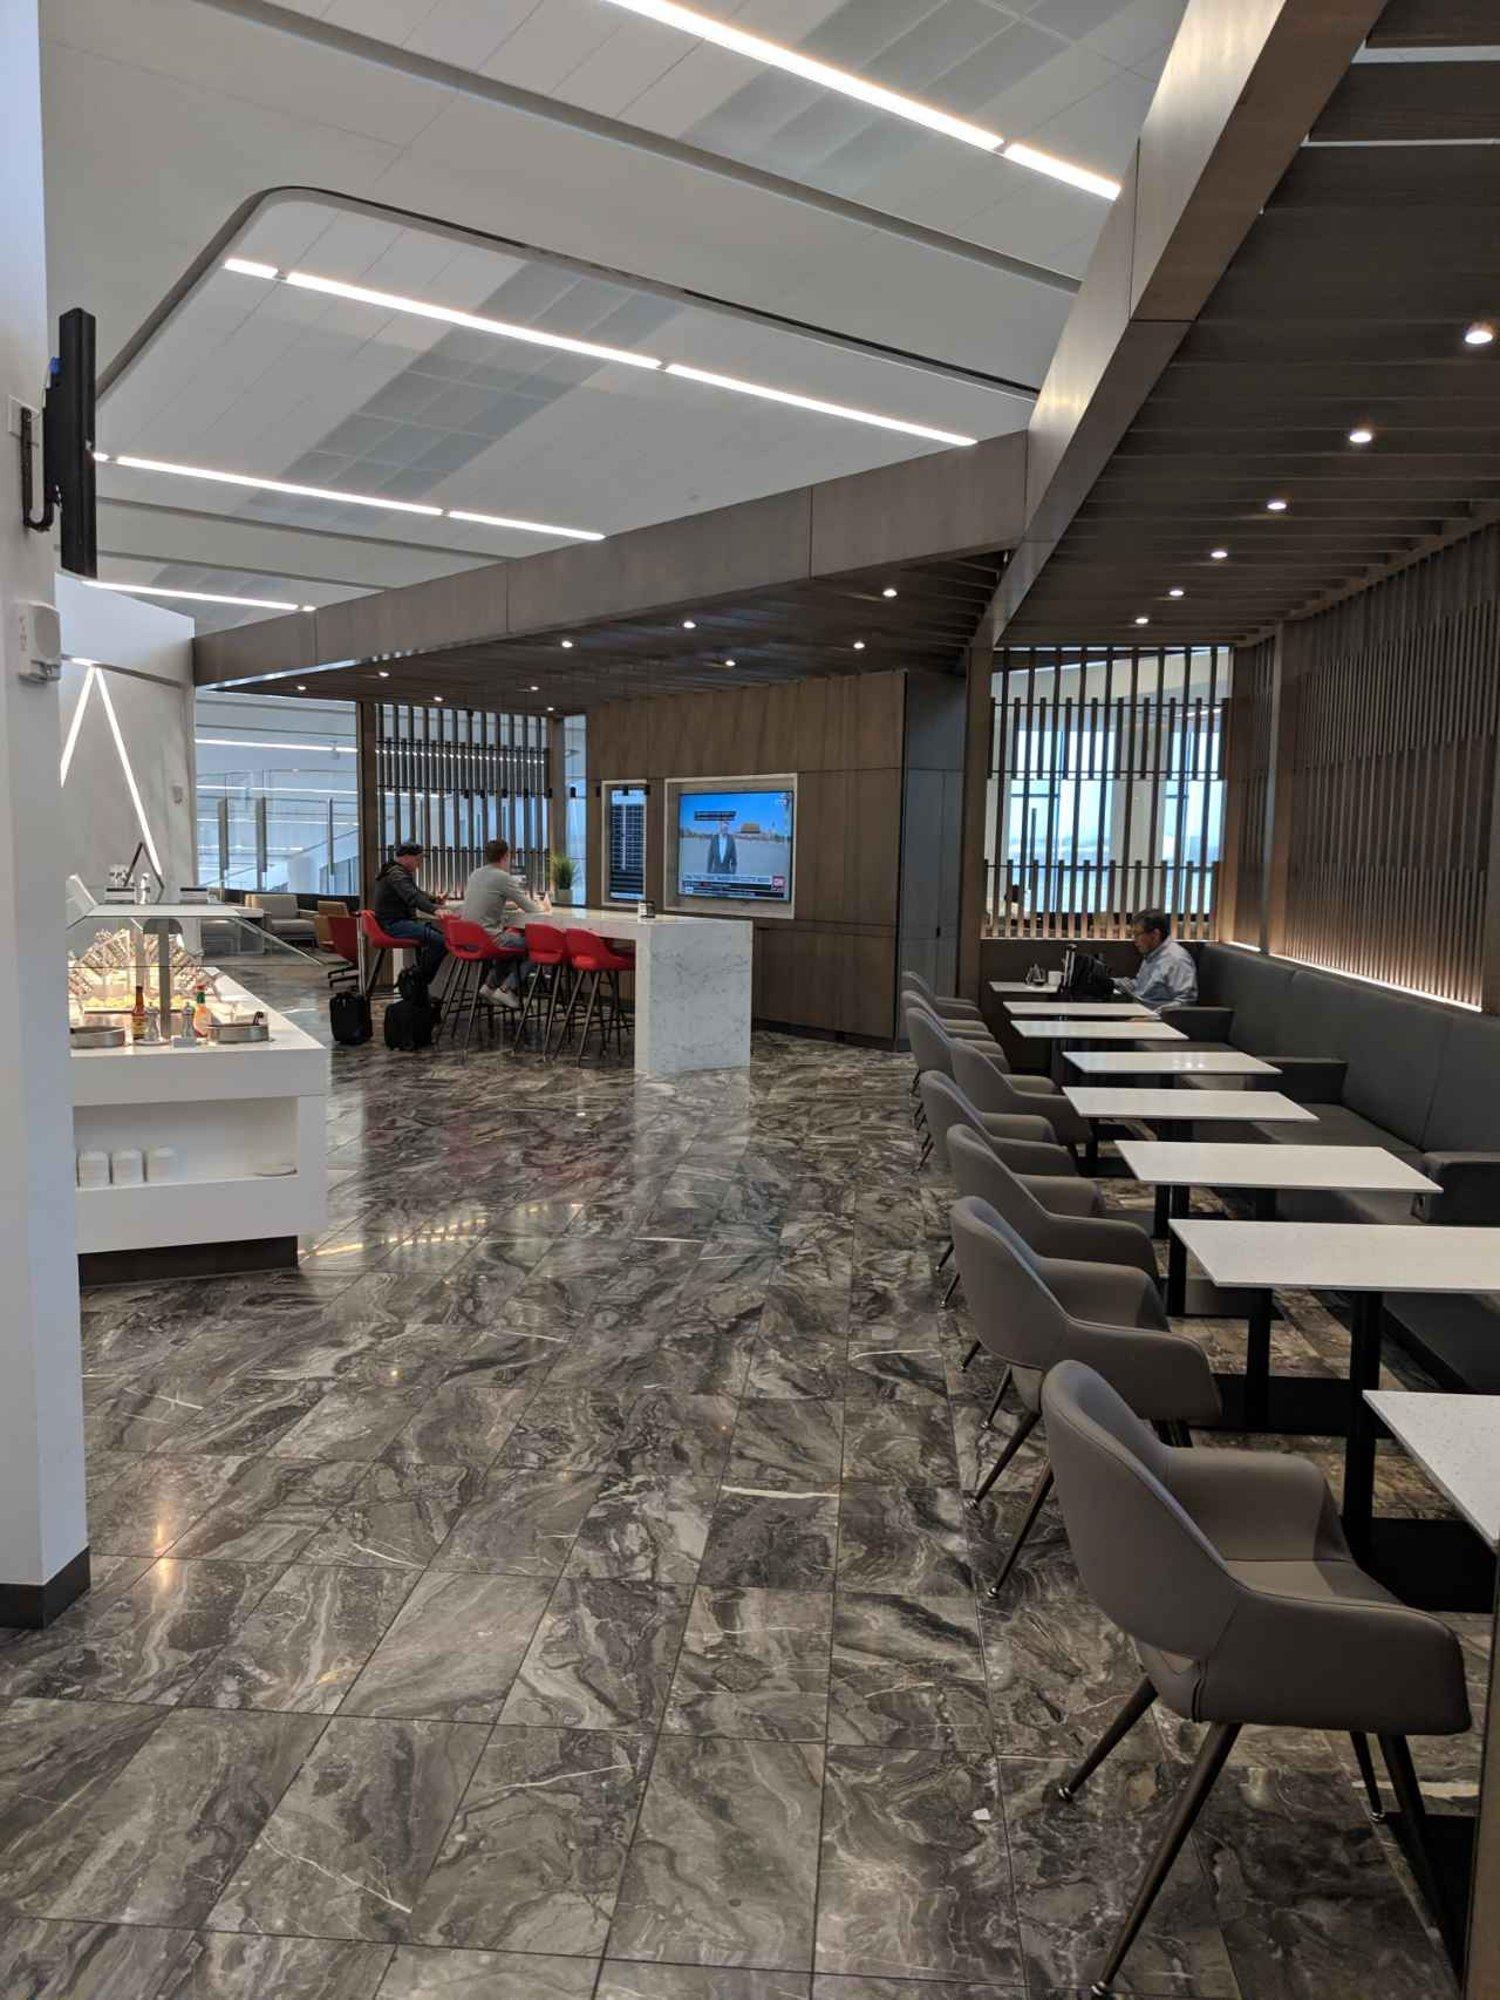 Air Canada Maple Leaf Lounge image 2 of 4